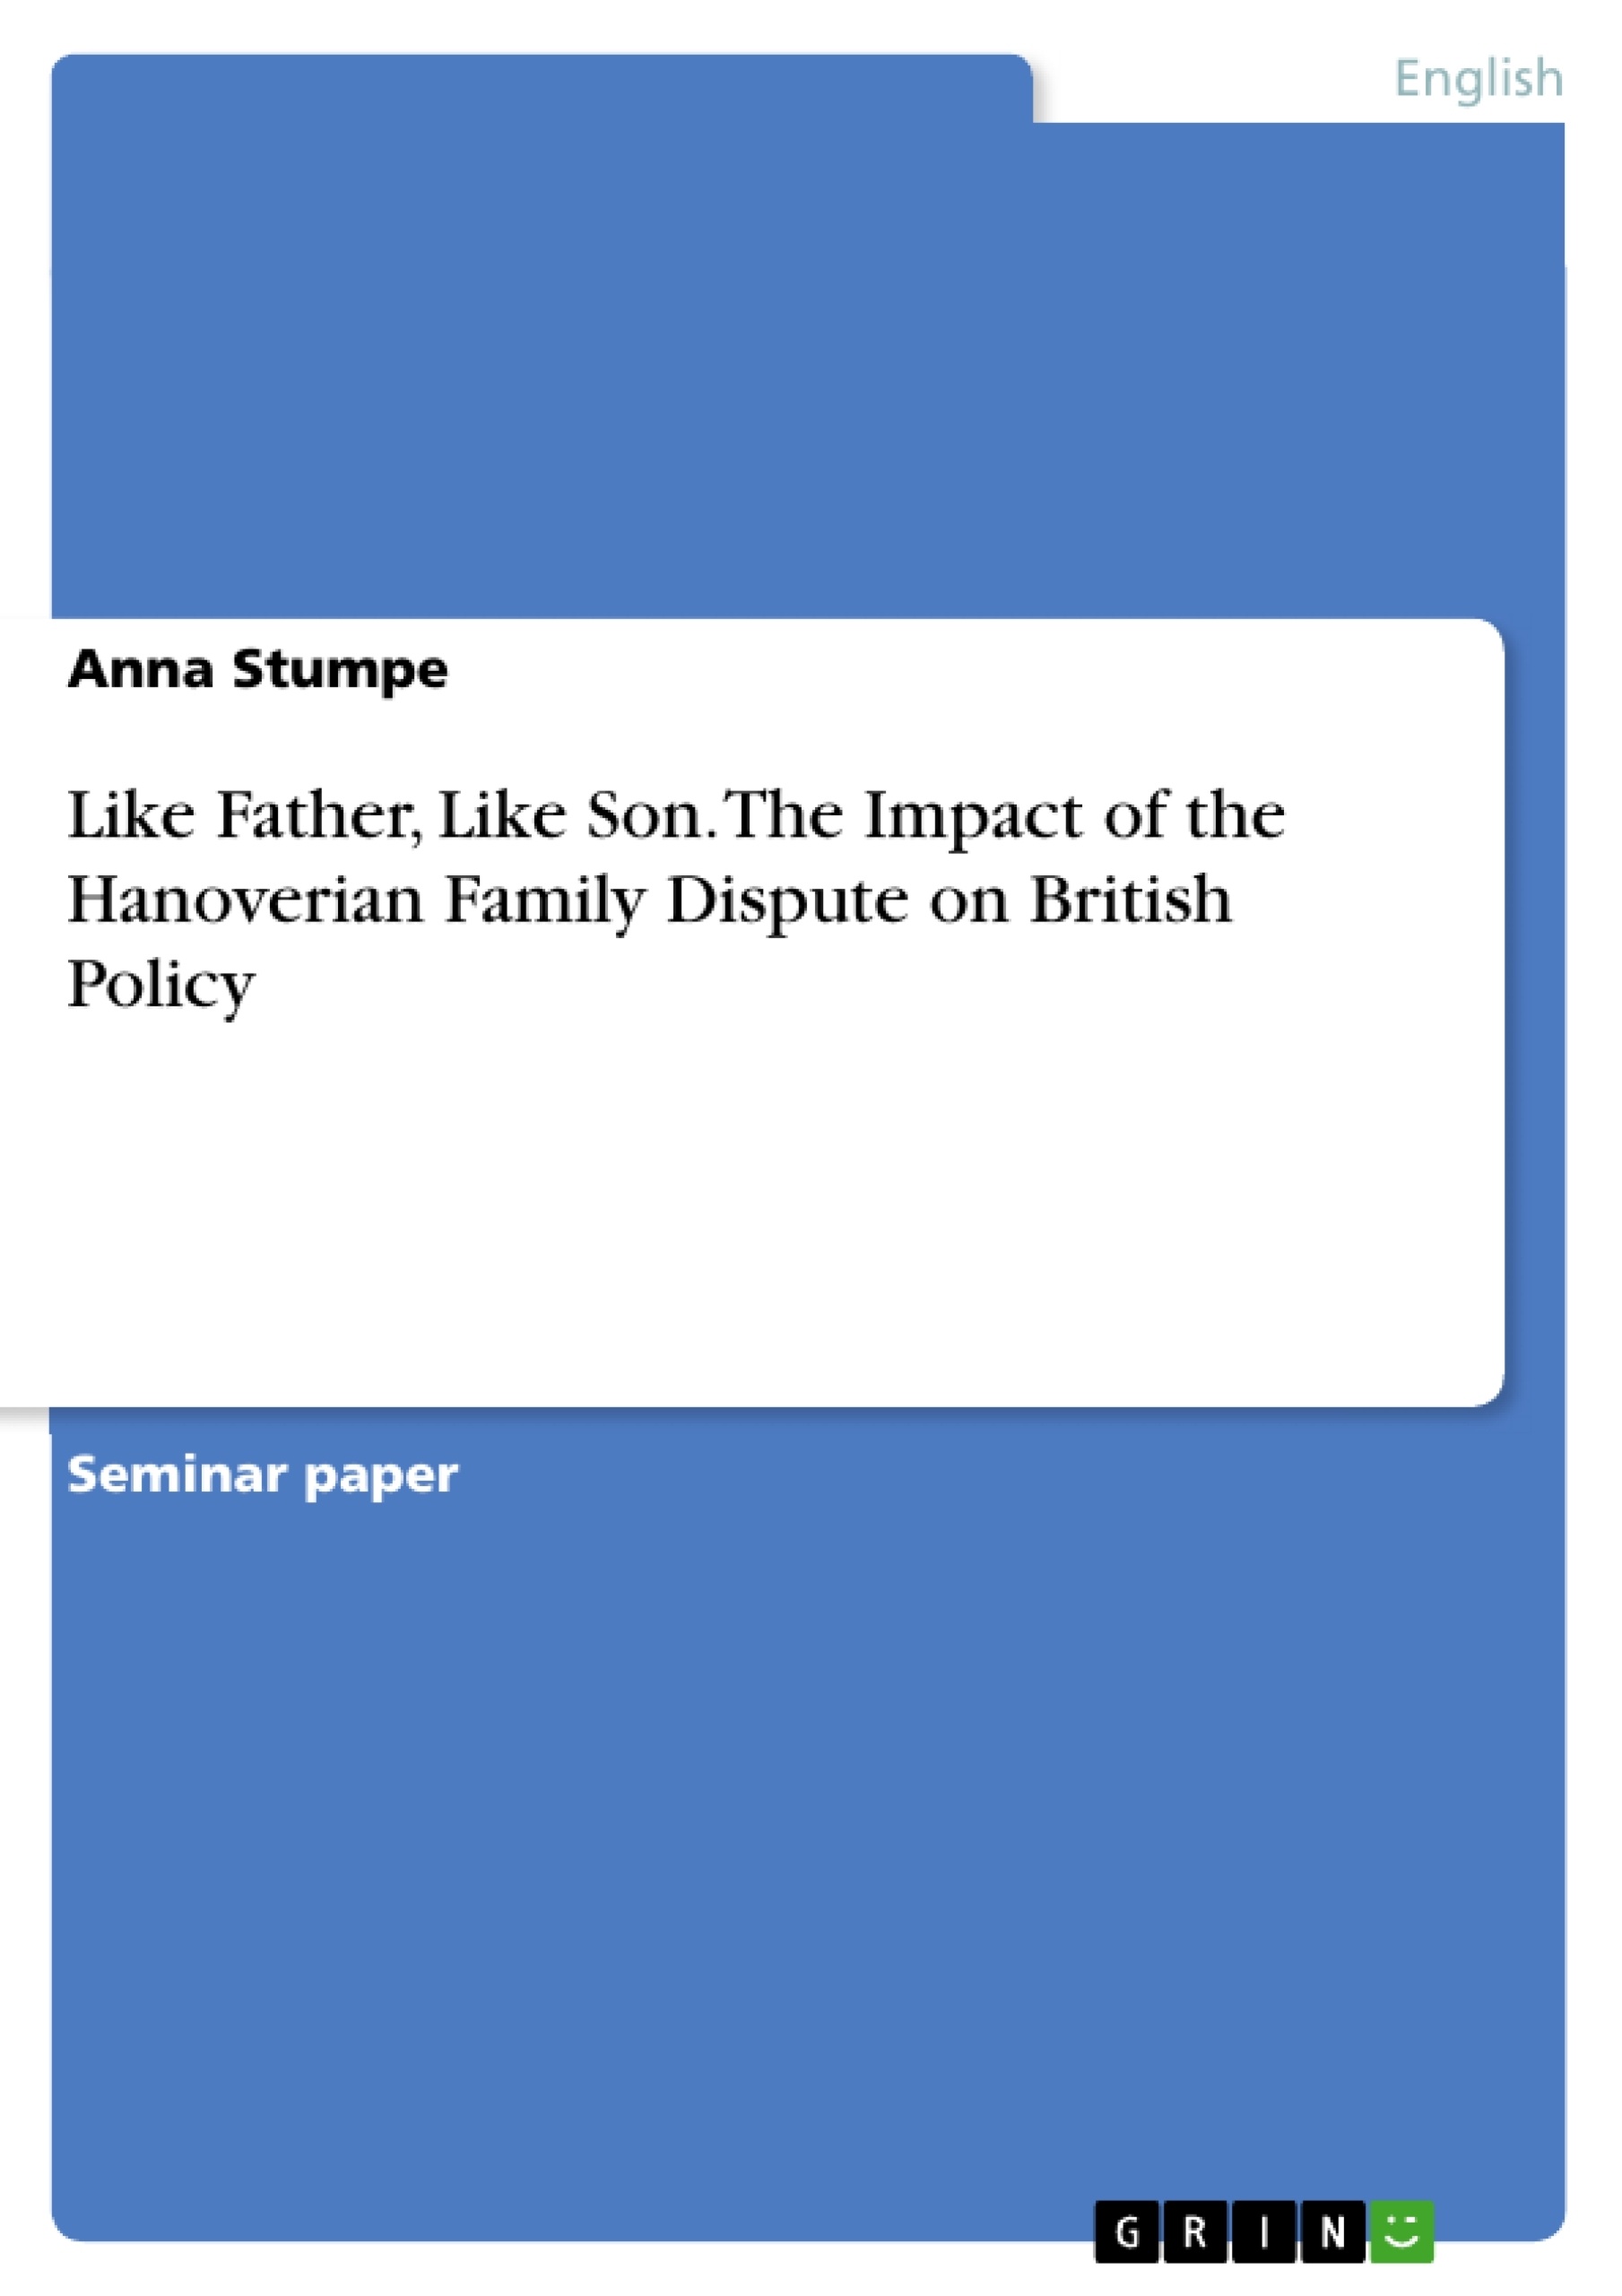 Titel: Like Father, Like Son. The Impact of the Hanoverian Family Dispute on British Policy